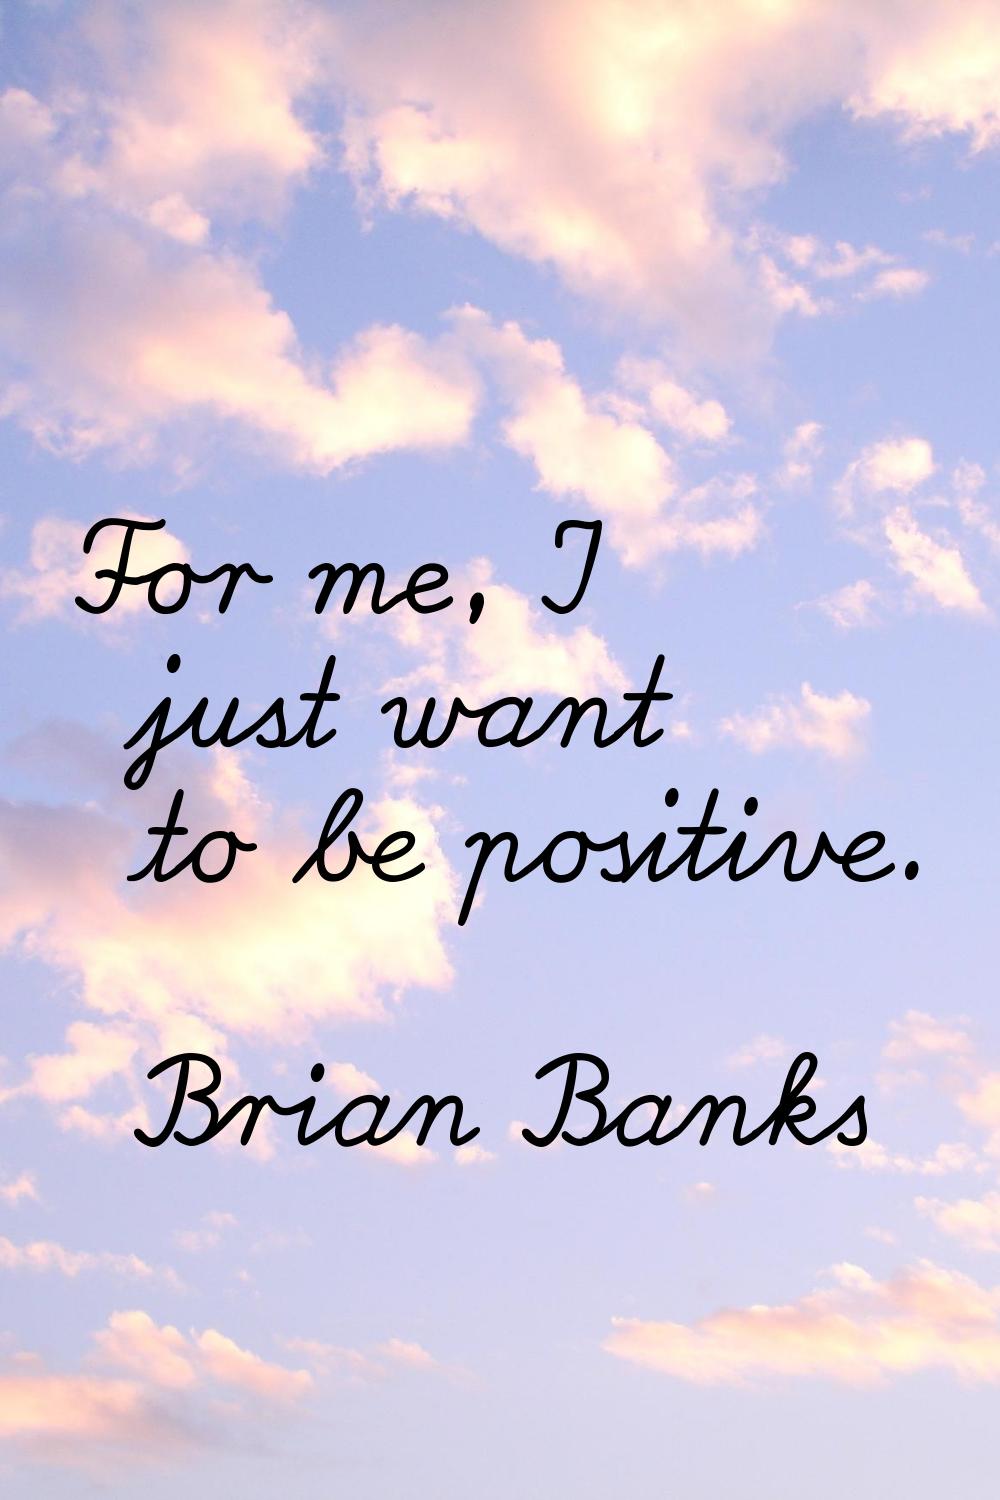 For me, I just want to be positive.